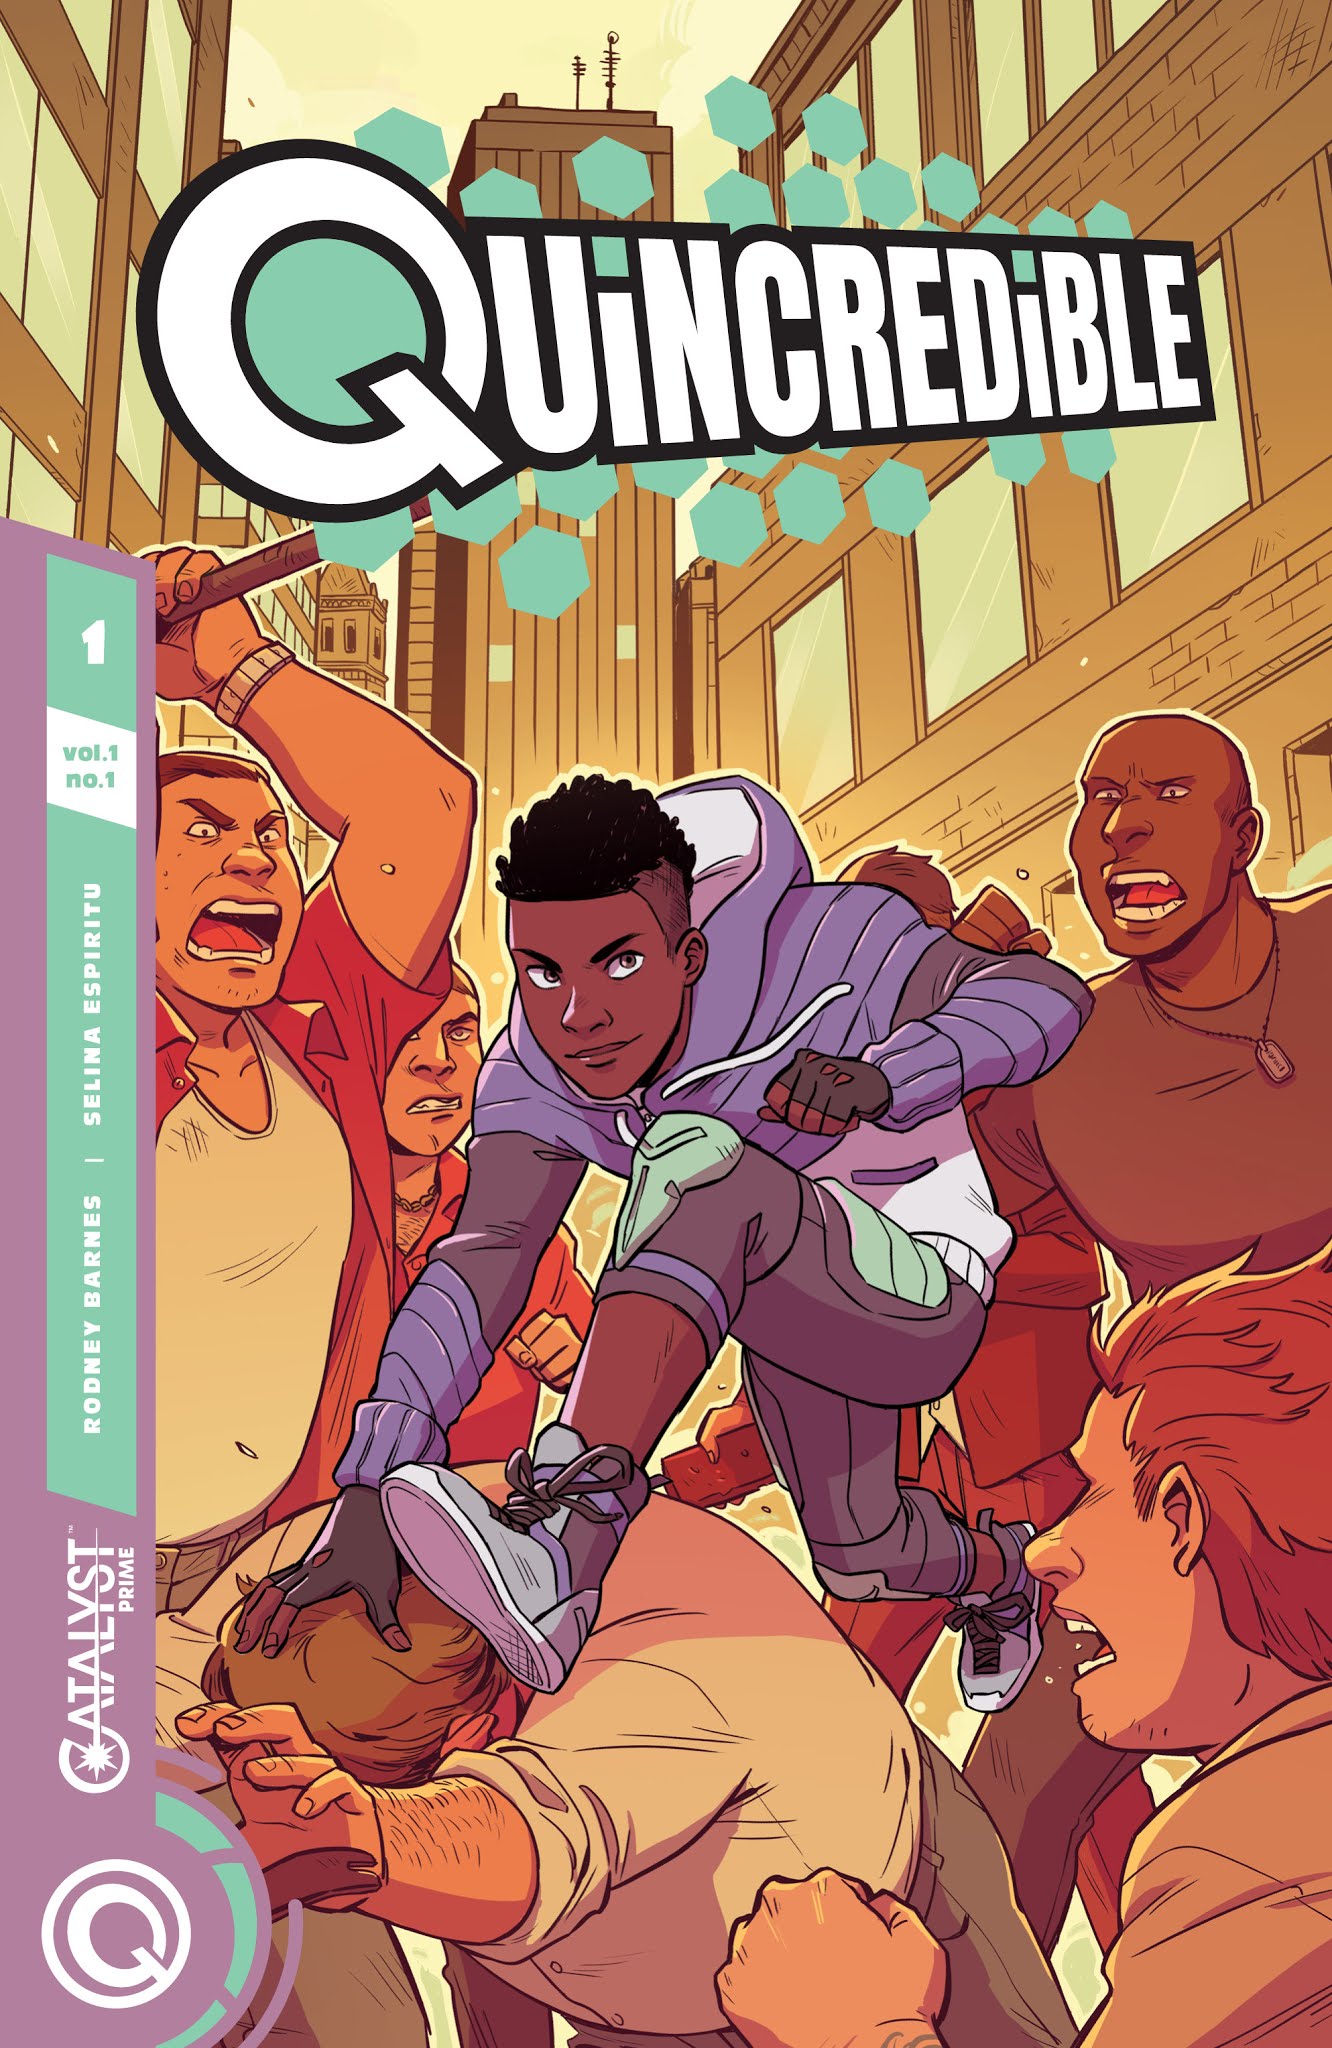 Read online Quincredible comic -  Issue #1 - 1